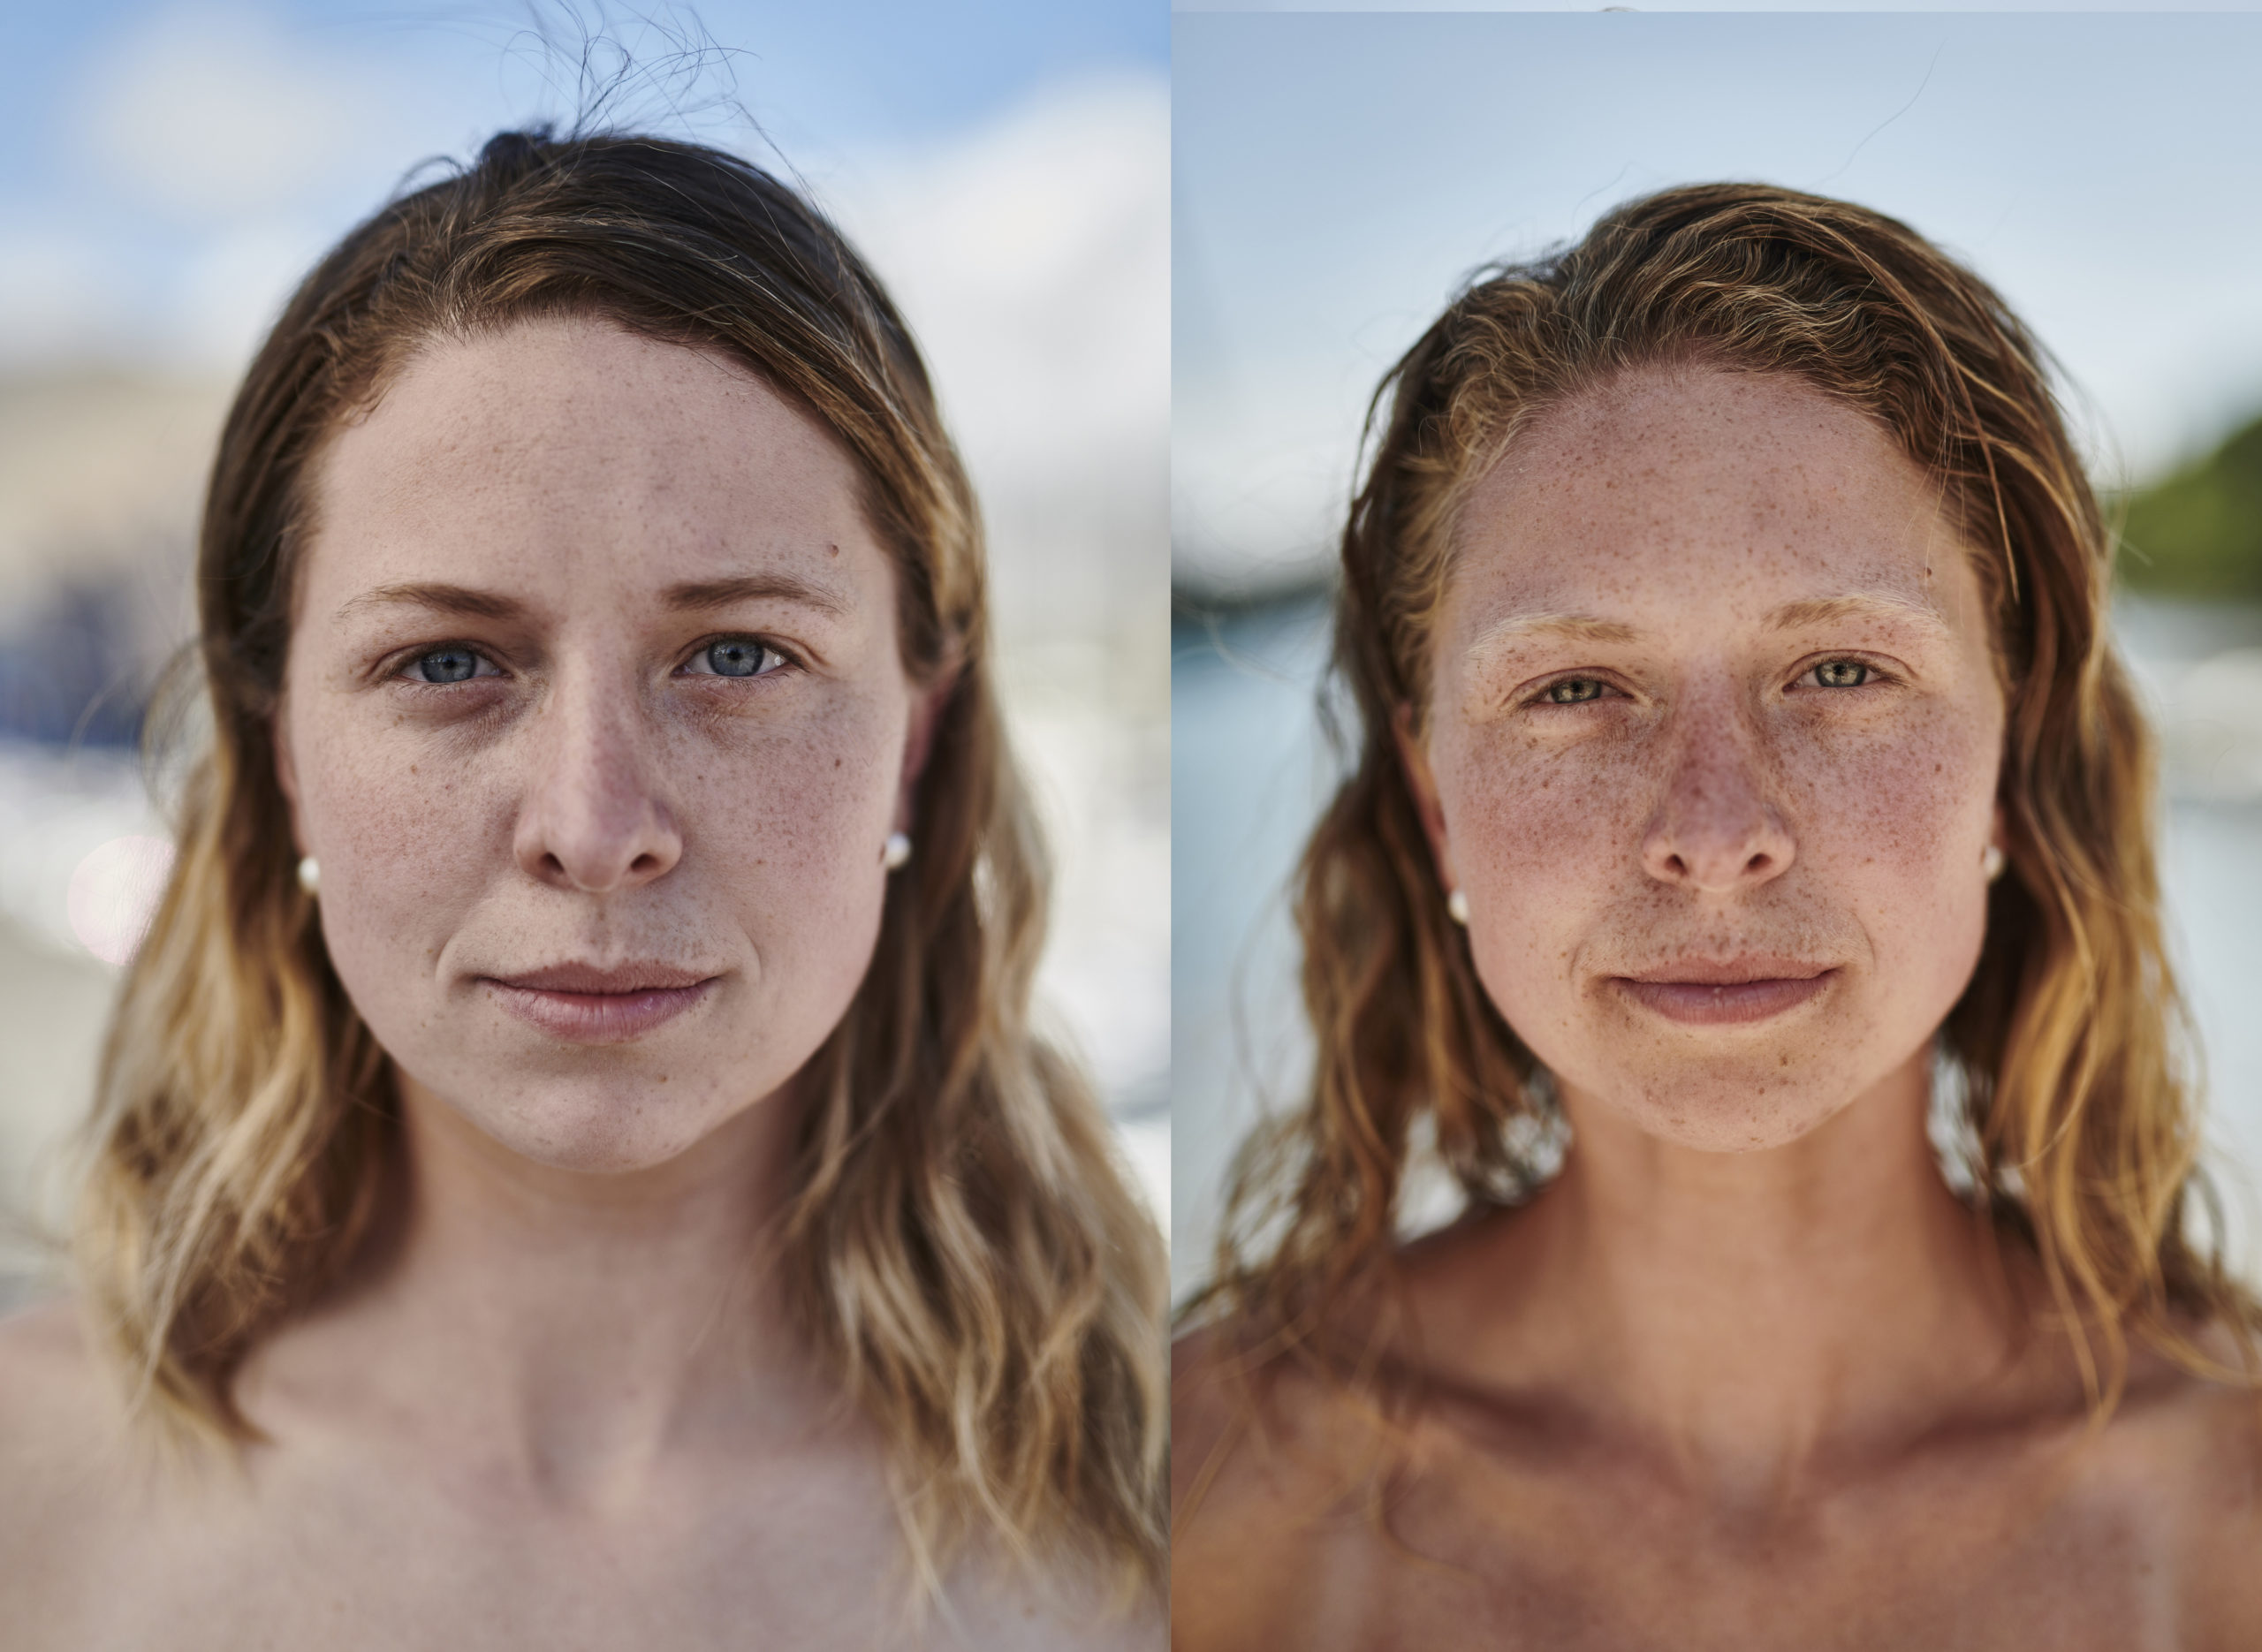 Side-by-side photos showing Anna McLean before and after the row across the Atlantic